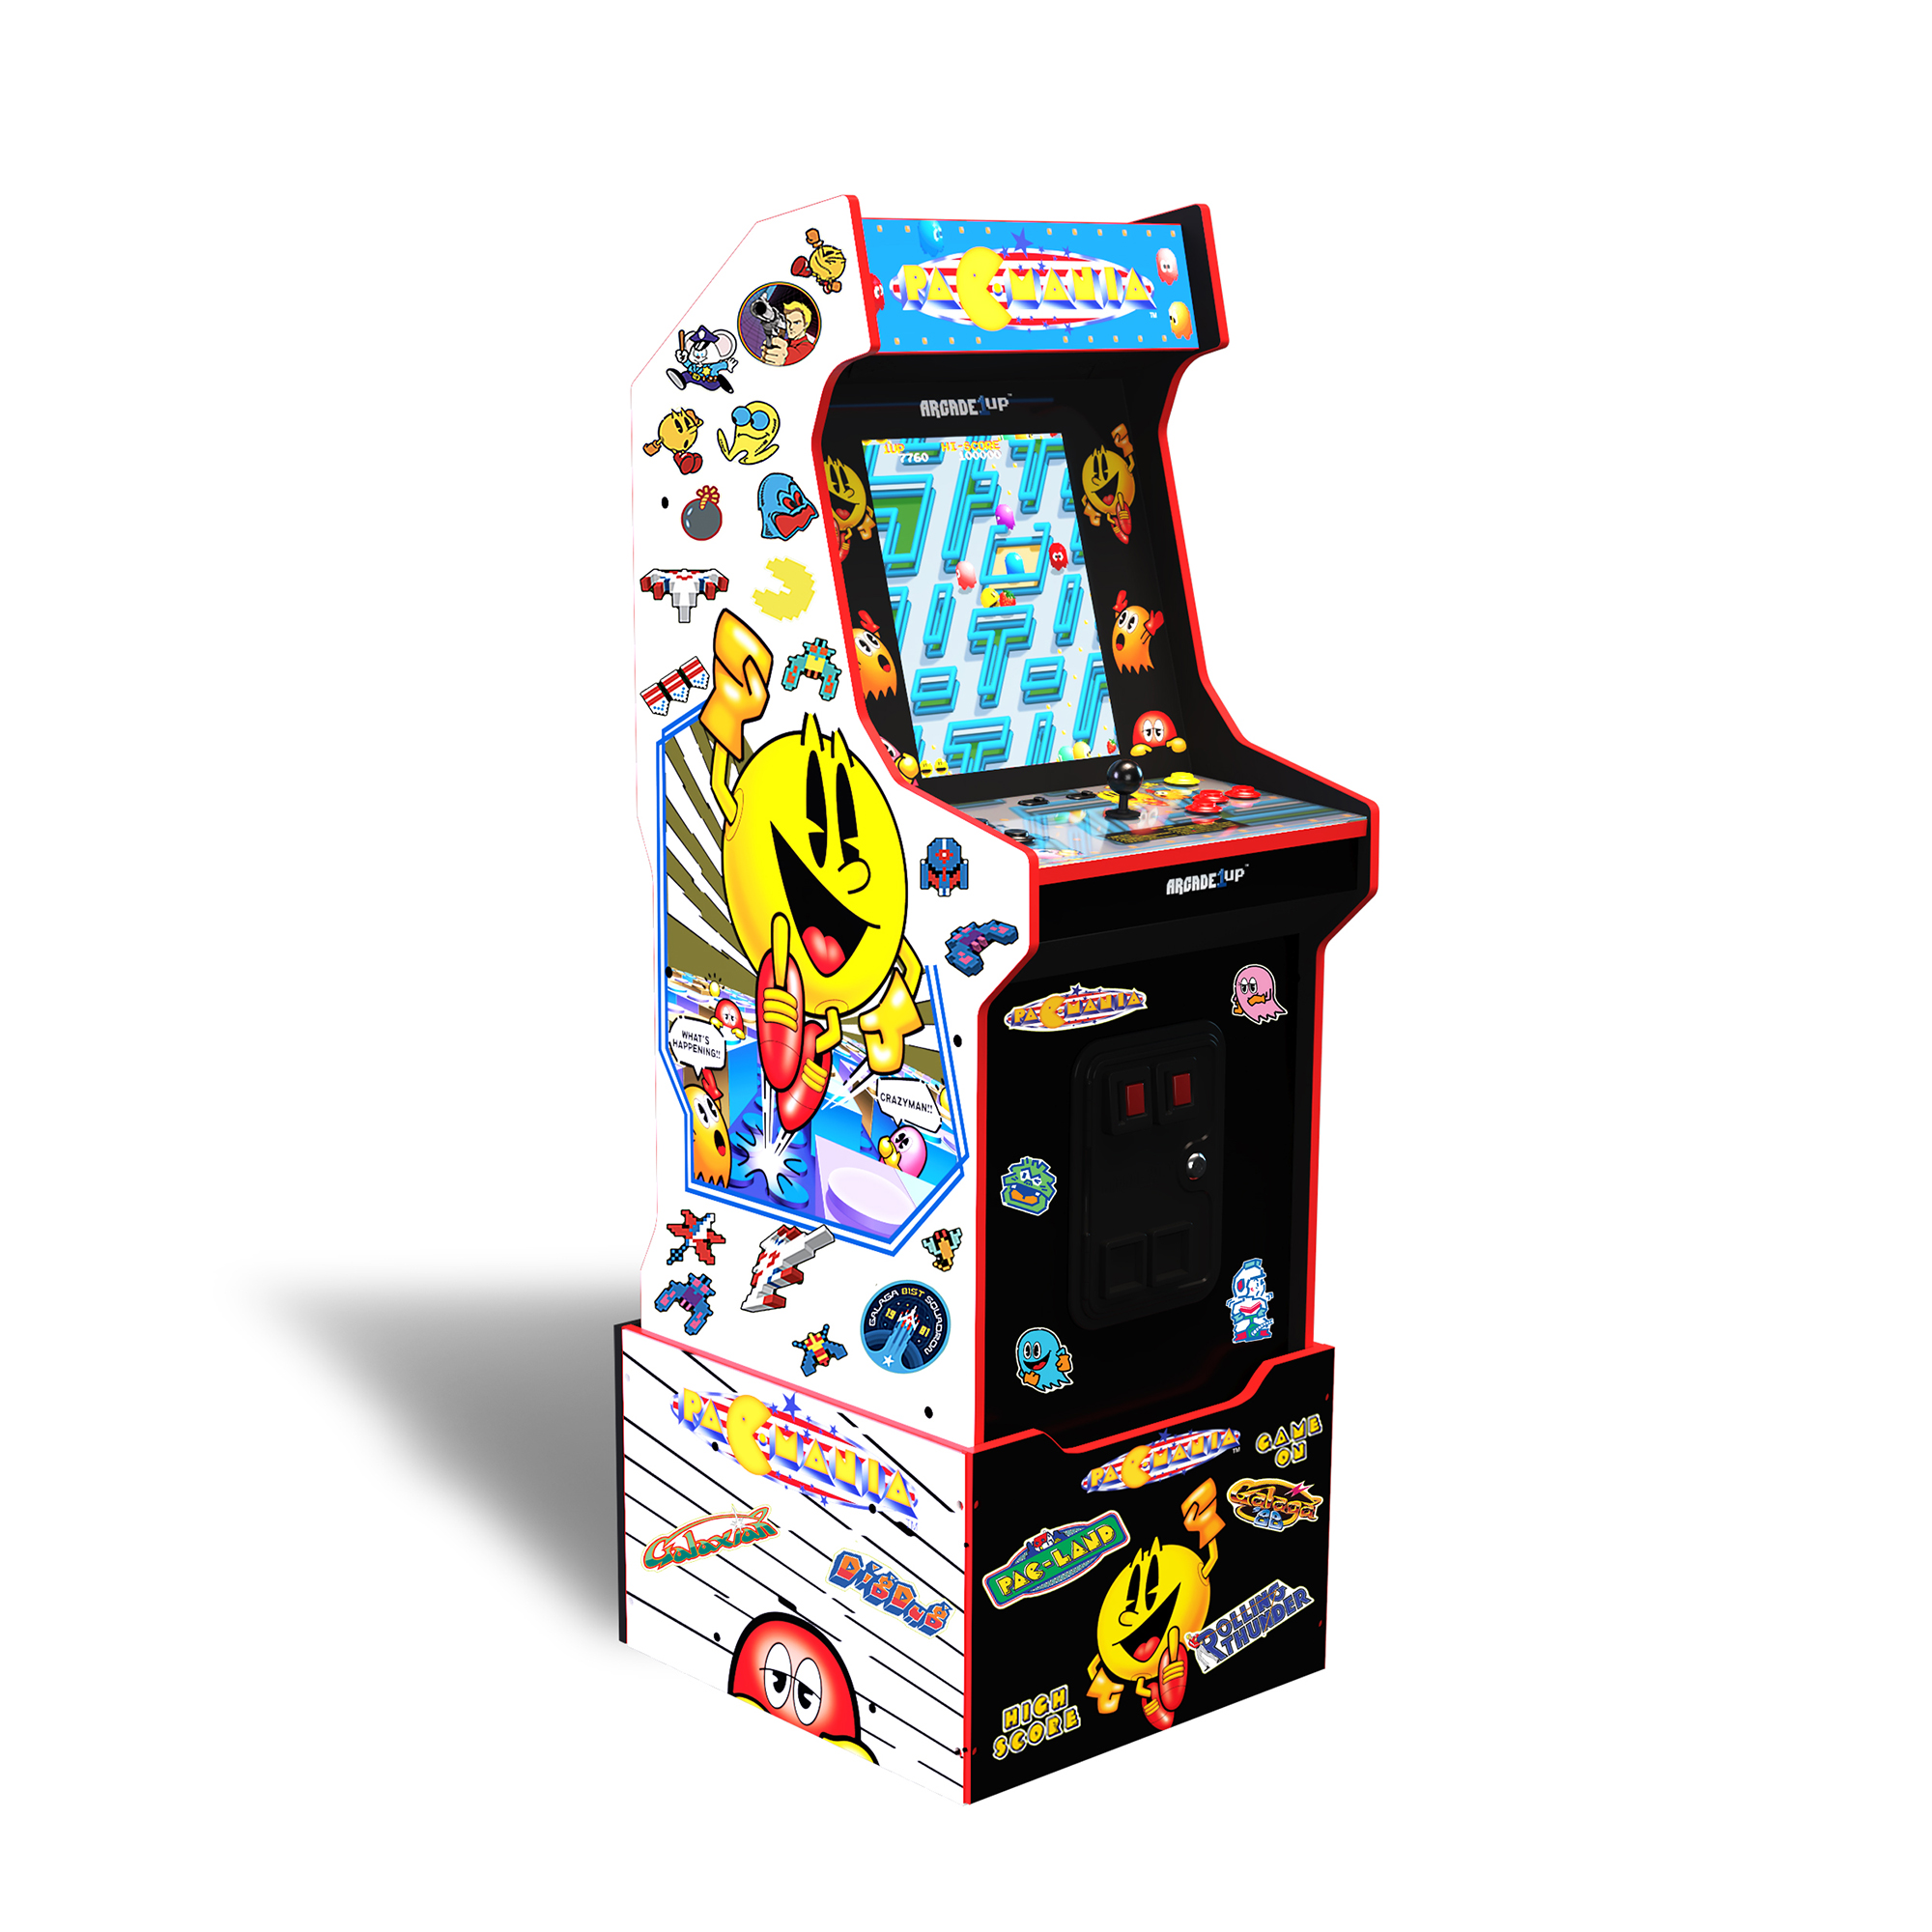 Arcade1UP - 14 Games in 1, PAC-MAN Customizable Video Game Arcade Featuring PAC-MANIA and includes 100 Bonus Stickers - image 2 of 17